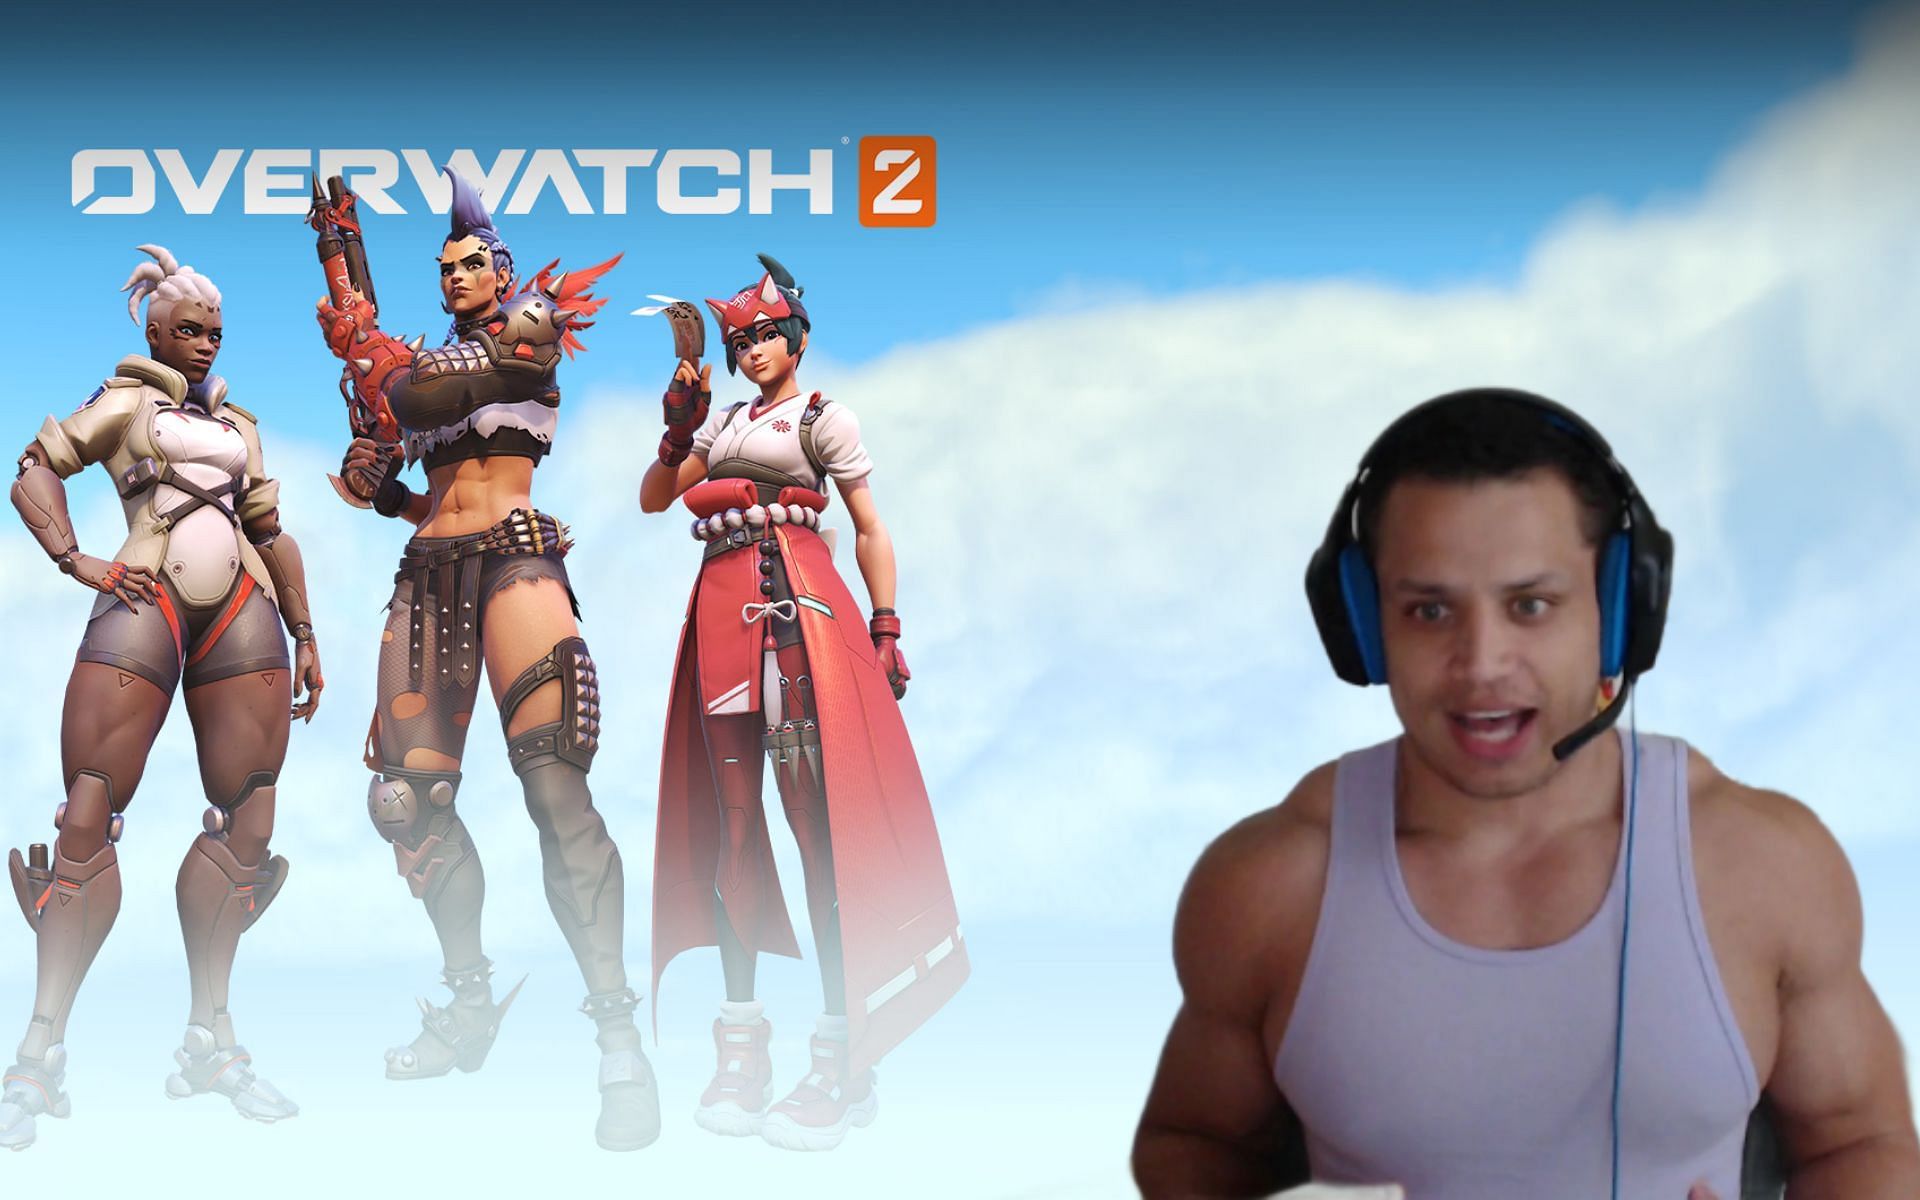 Tyler1 rage quits Overwatch 2 and explains why (Image via Sportskeeda)